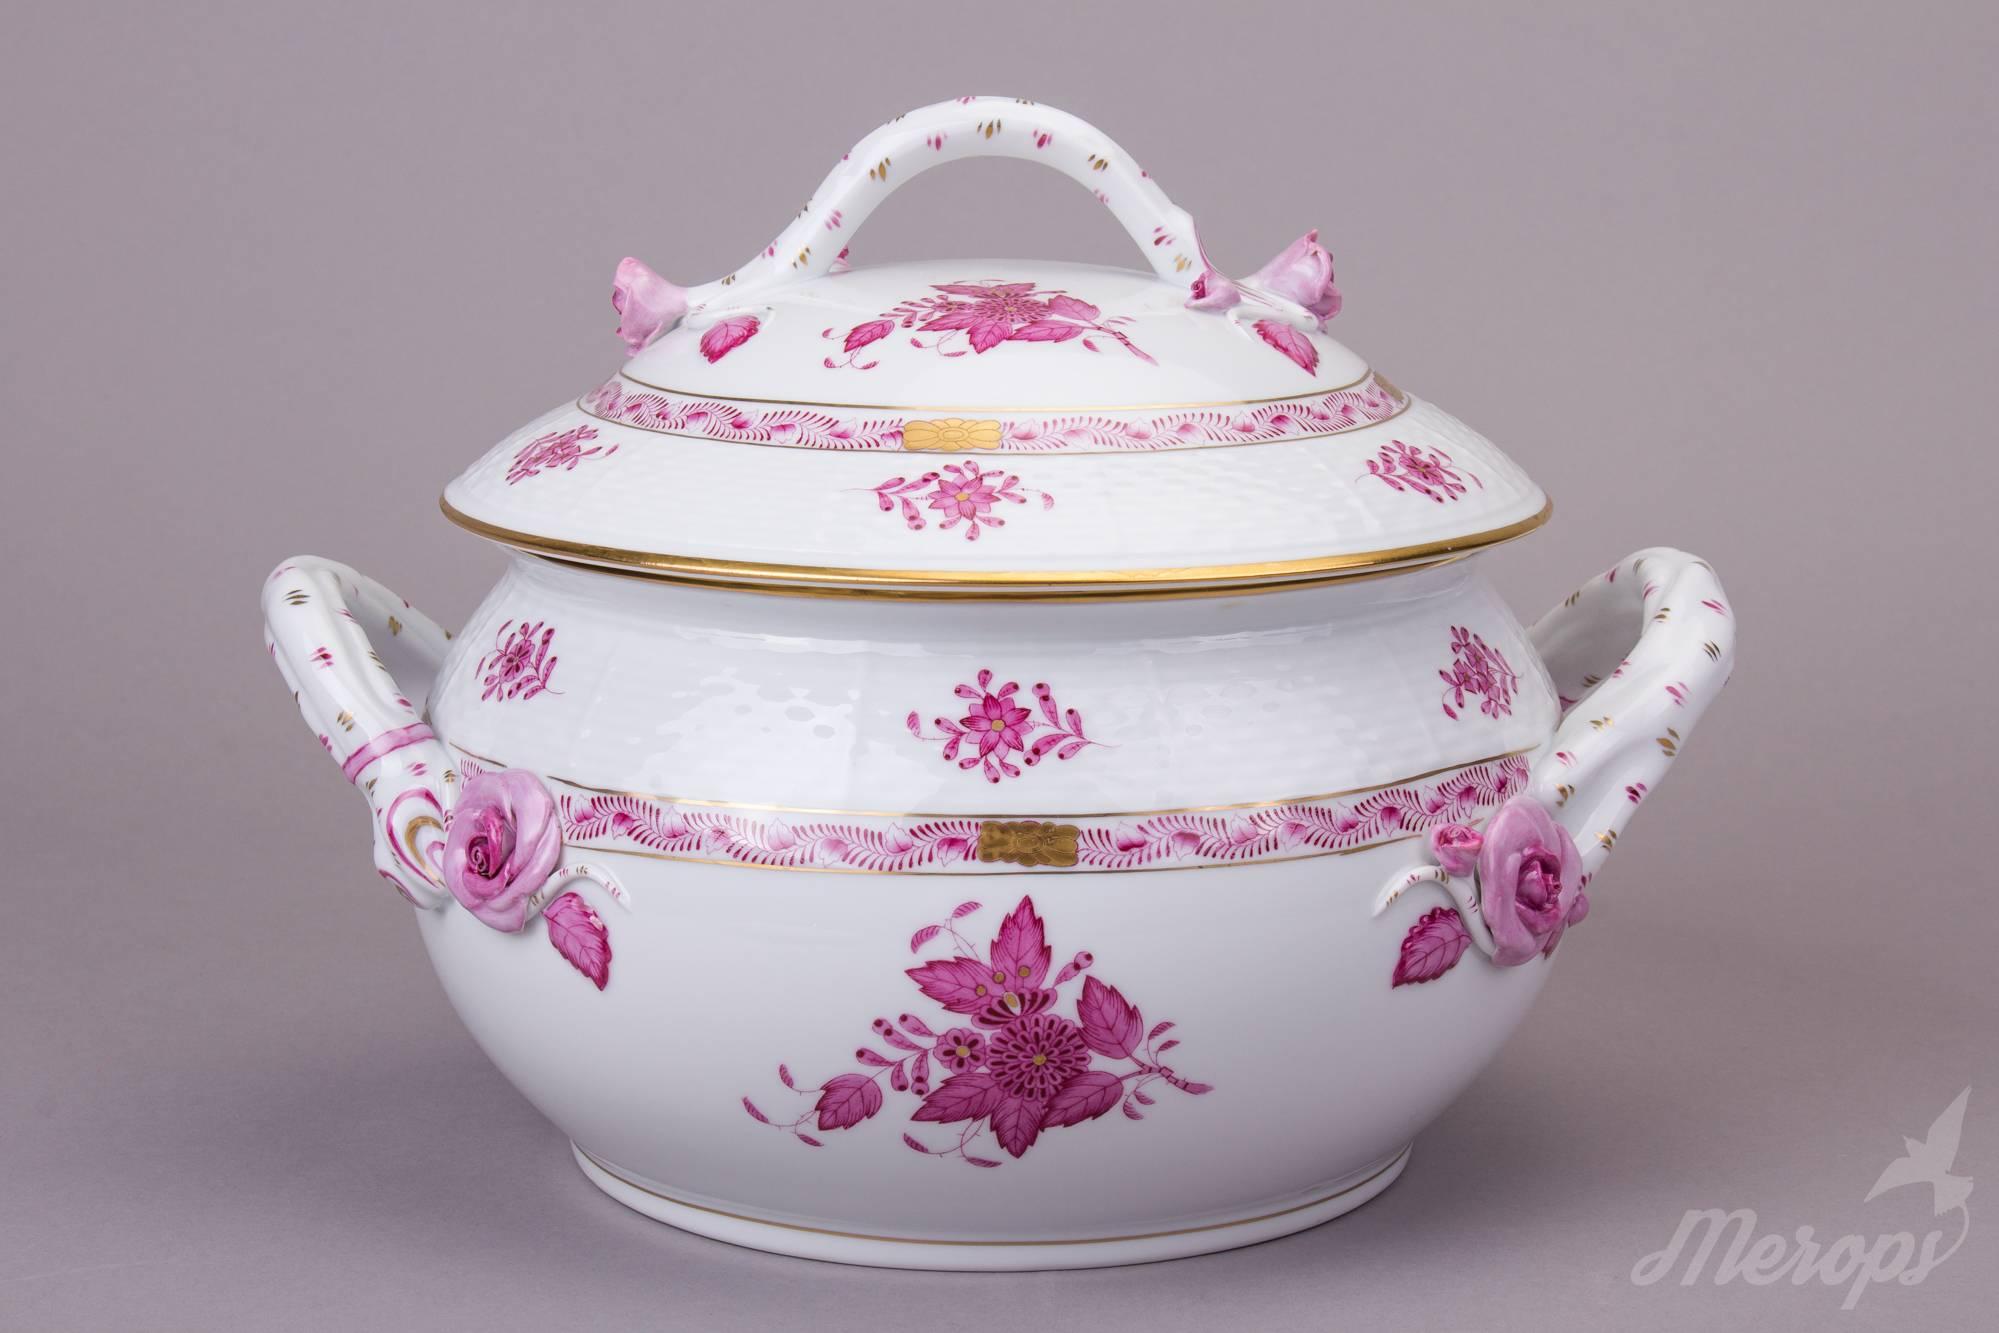 We ship this item worldwide for 200 USD with insurance. Shipping usually takes 3-7 business days. Express shipping with FedEx (2 days) available for 300 USD. 

Manufacturer: Herend Porcelain Manufactory (Hungary)
Quality: Hand-painted, 1st